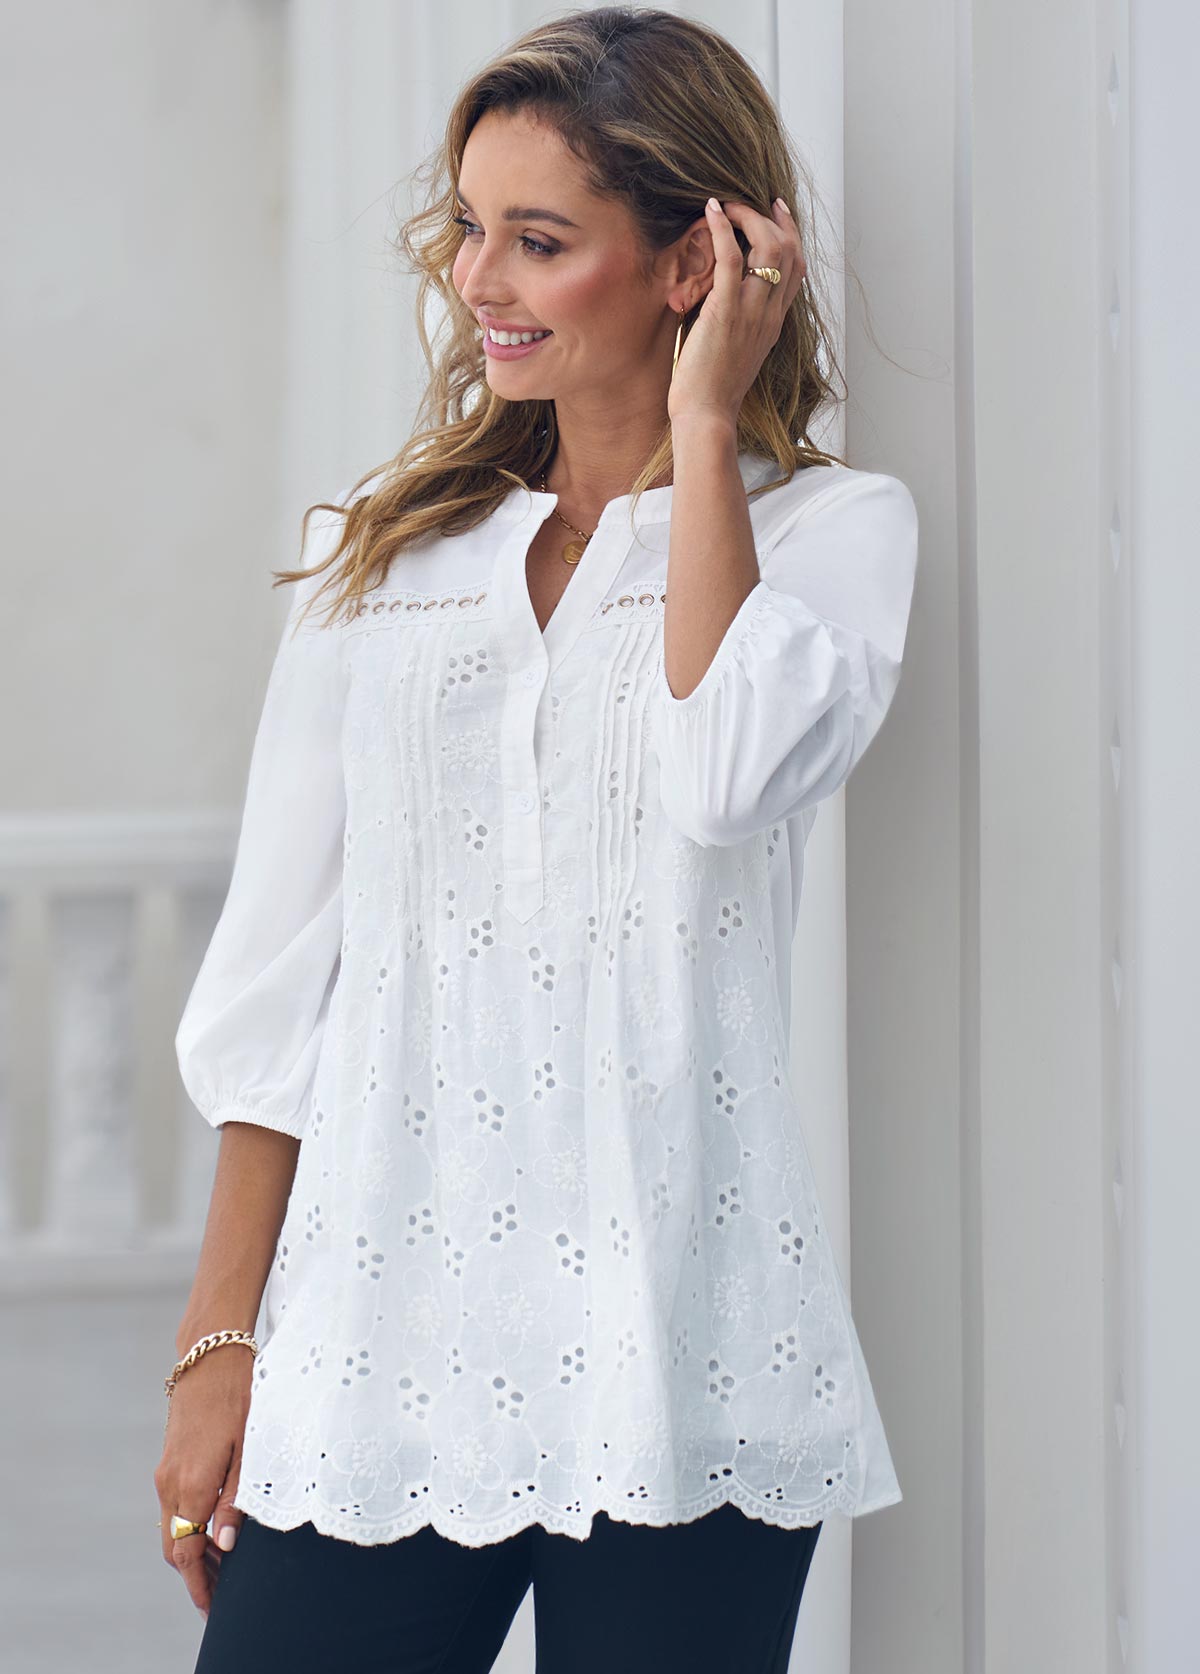 Embroidered Hollow Out Split Neck White Blouse | modlily.com - USD 39.98